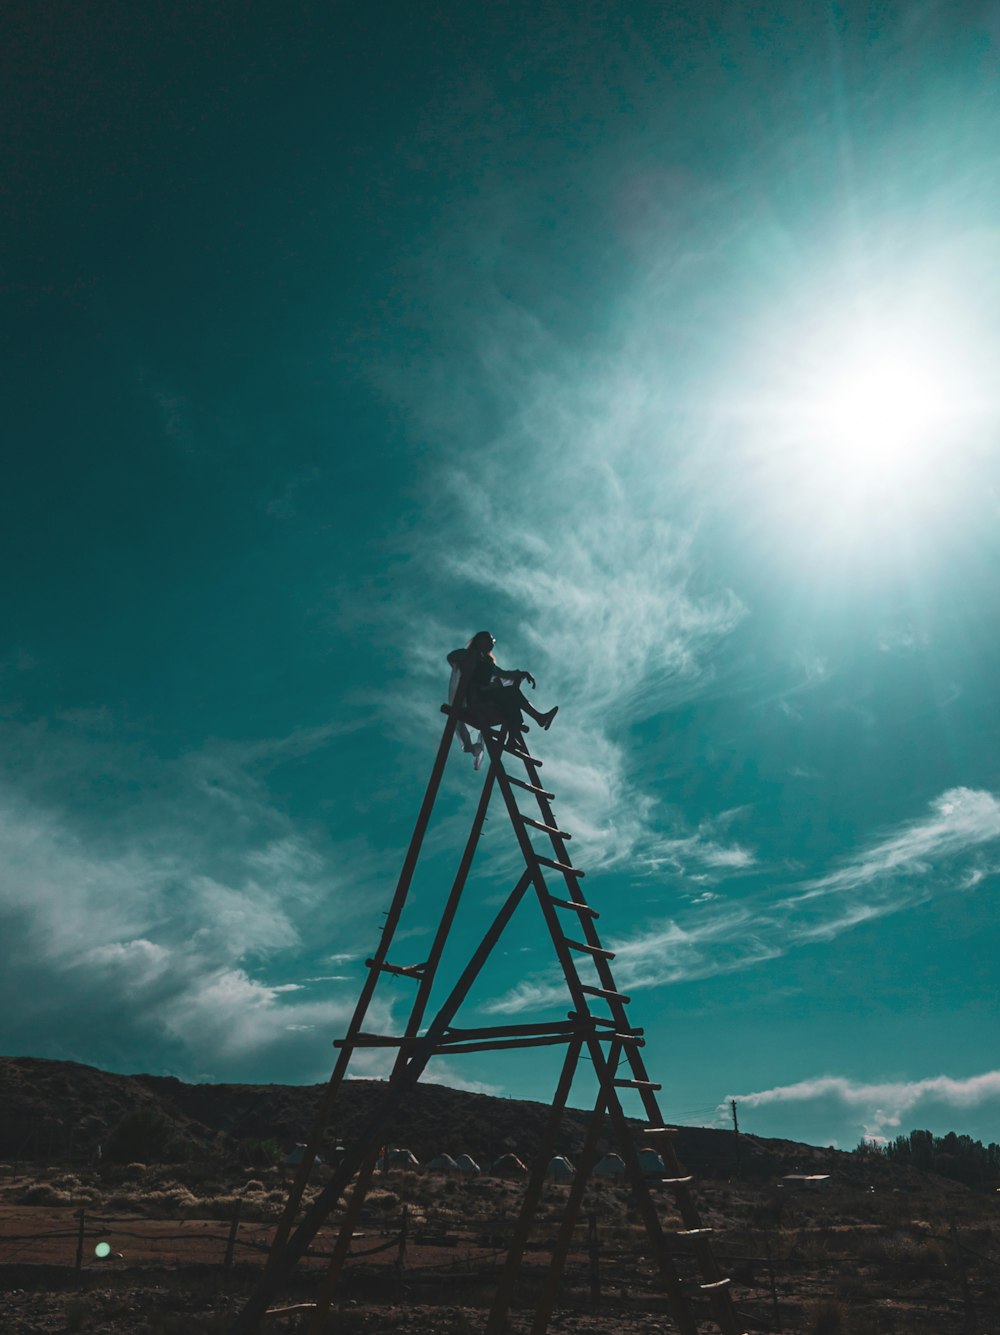 a man on a ladder reaching up into the sky